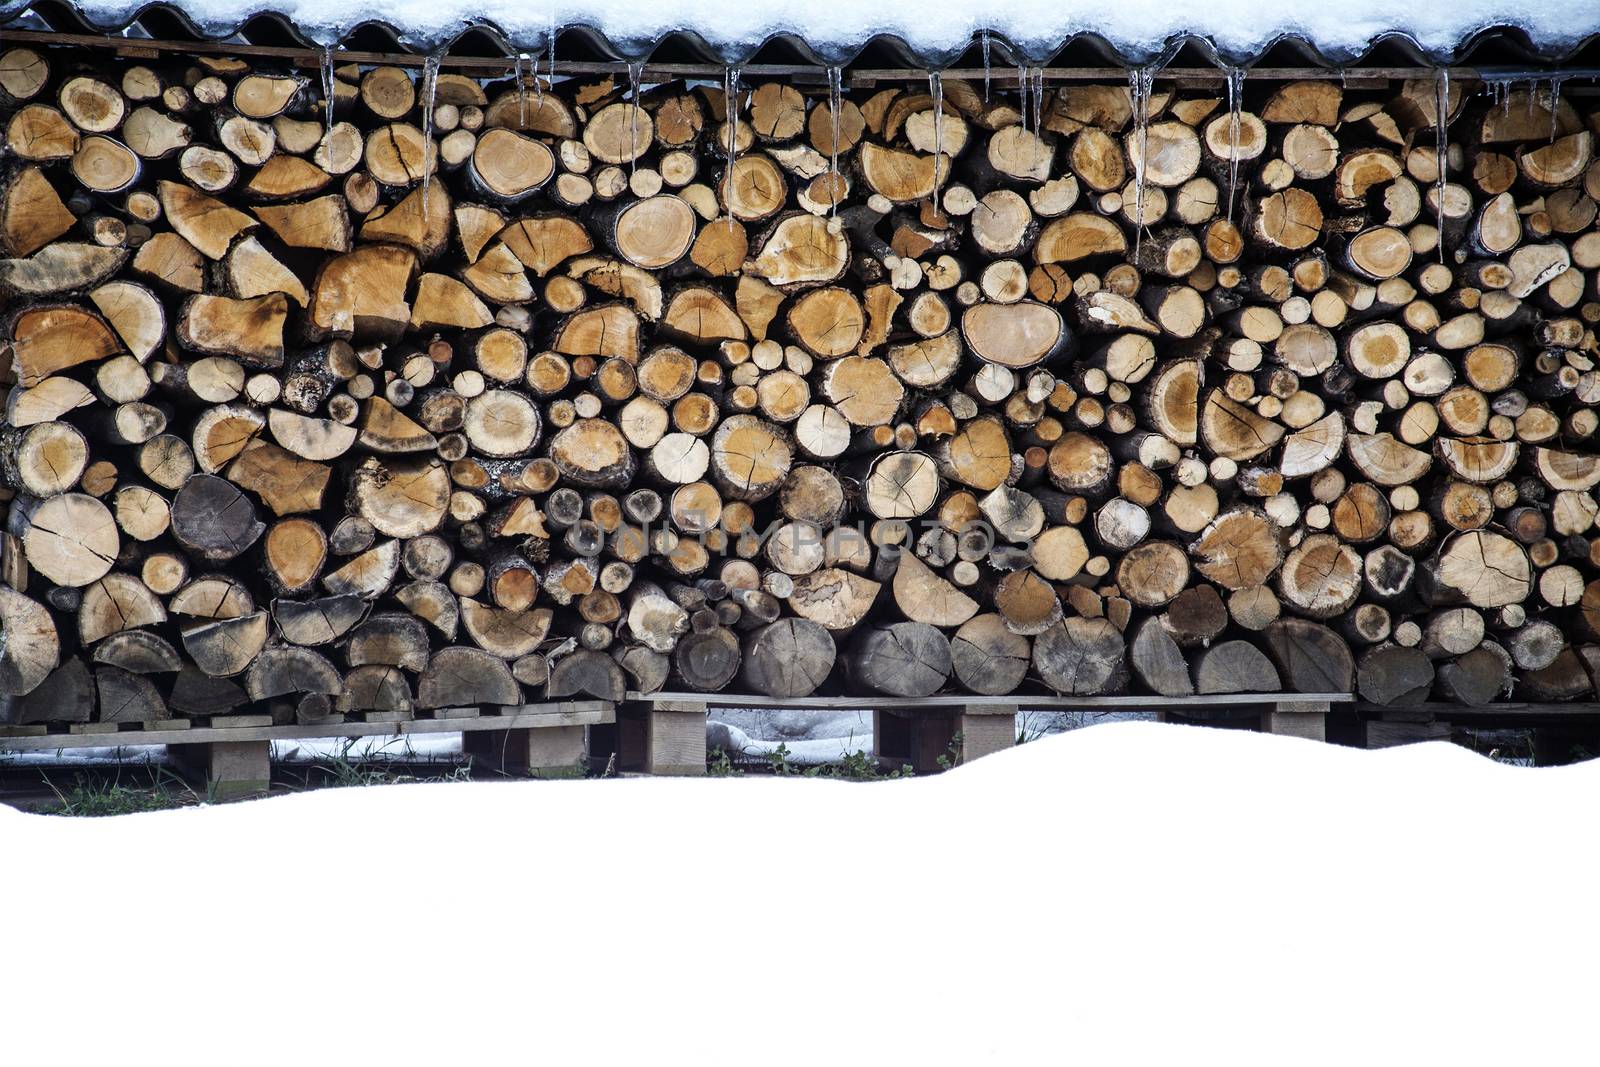 Wood pile in winter by photosampler